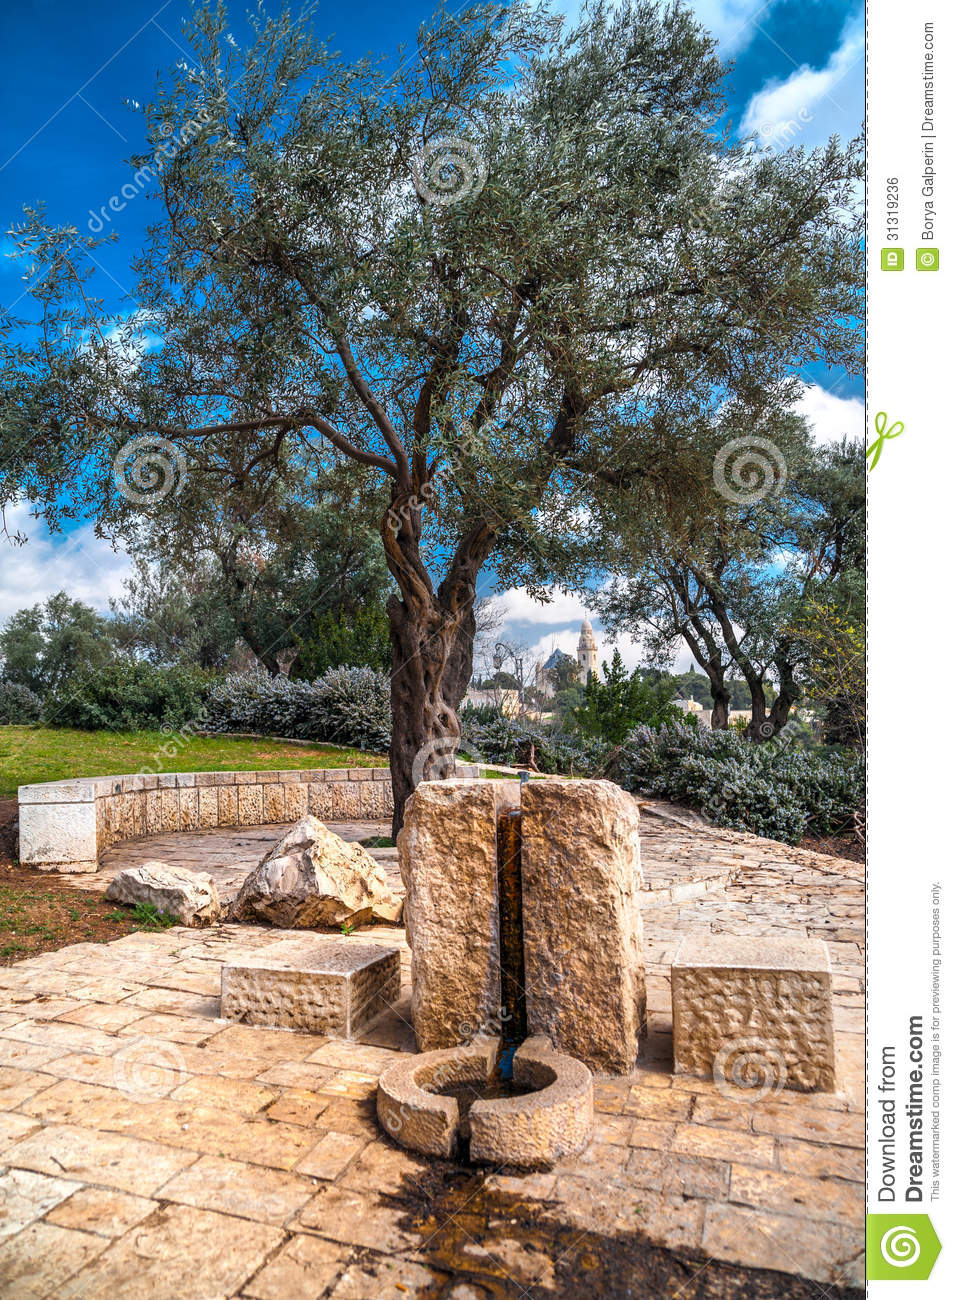 Drinking Fountain In The Park Of Jerusalem Near The Old City 